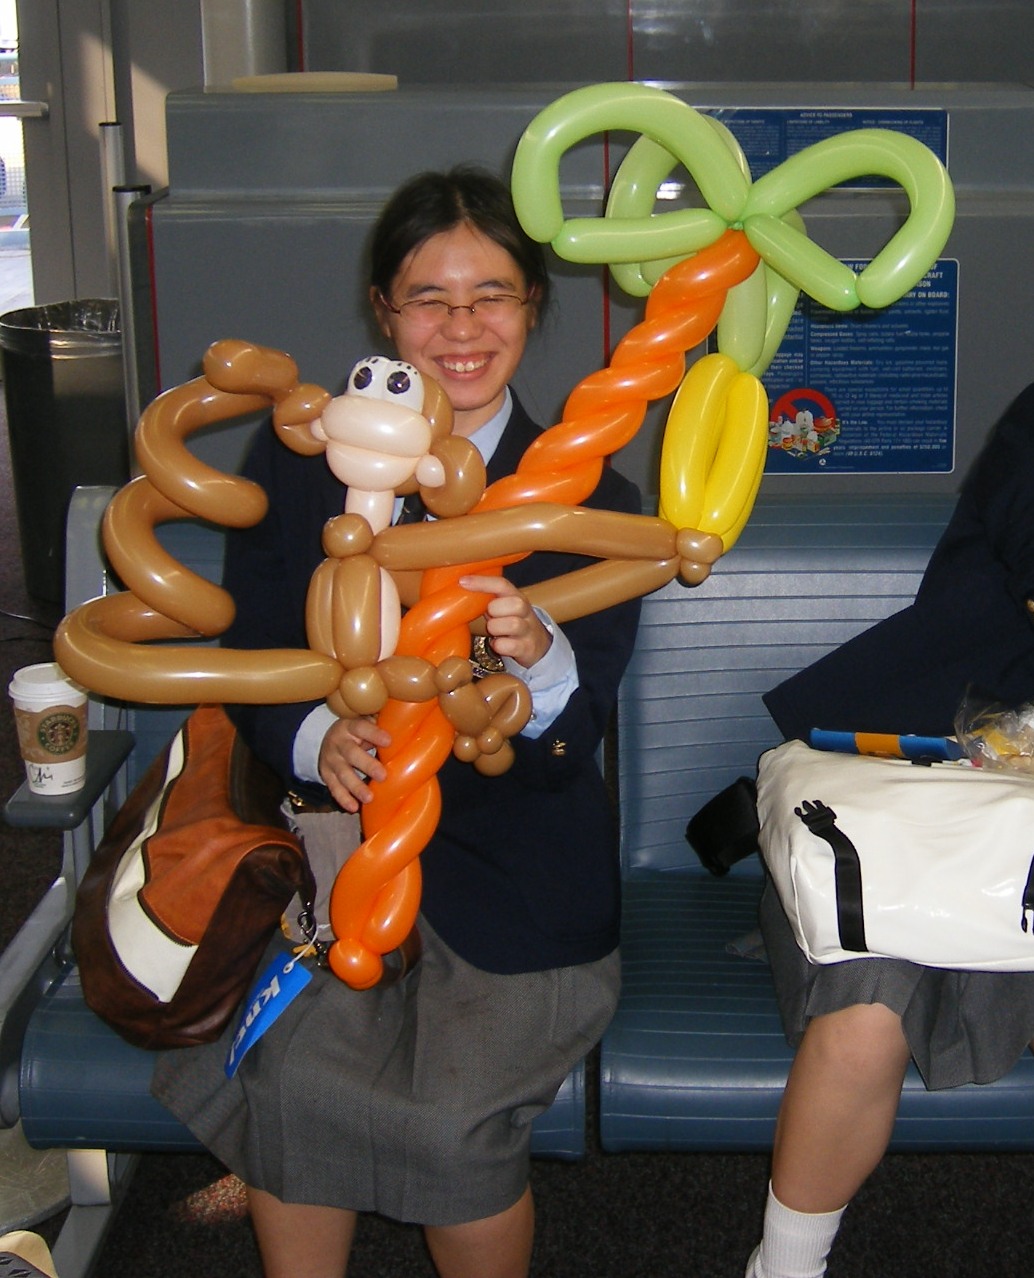 Balloon Artist | YourBalloonMan  -  Source  -  CC BY-ND